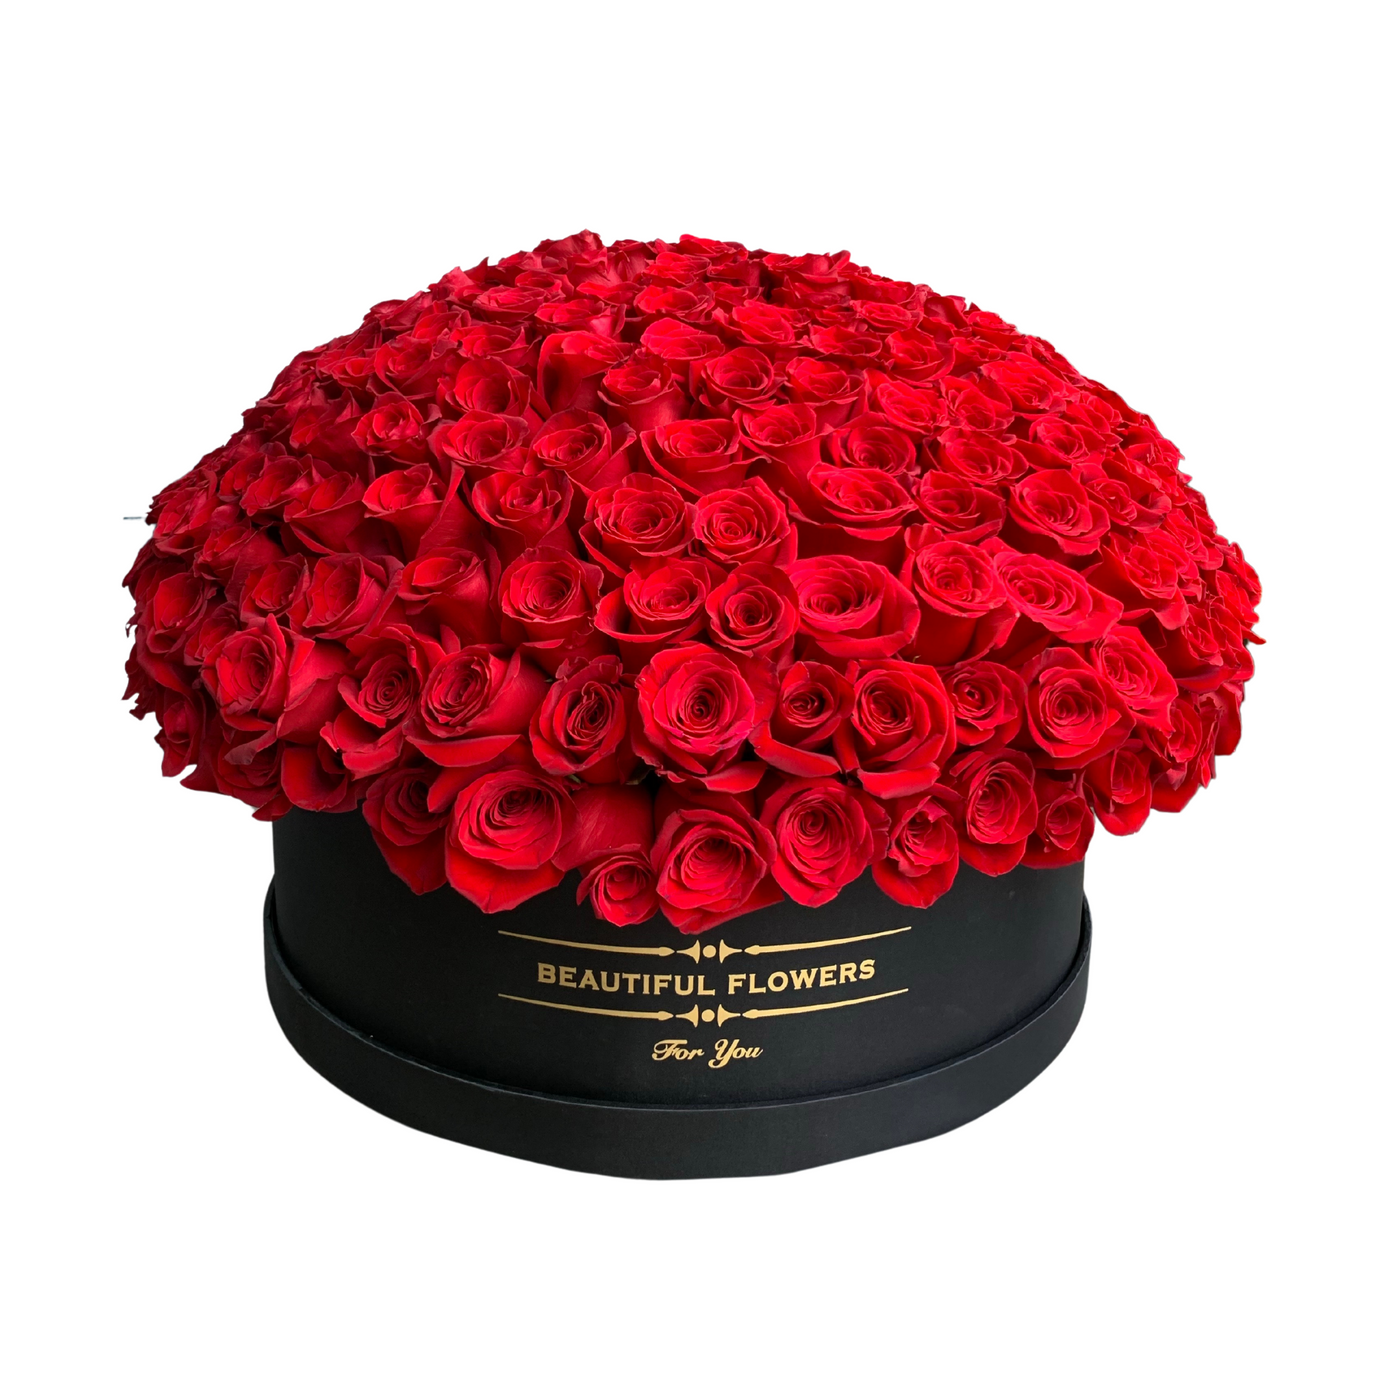 300 Perfect Deluxe Roses